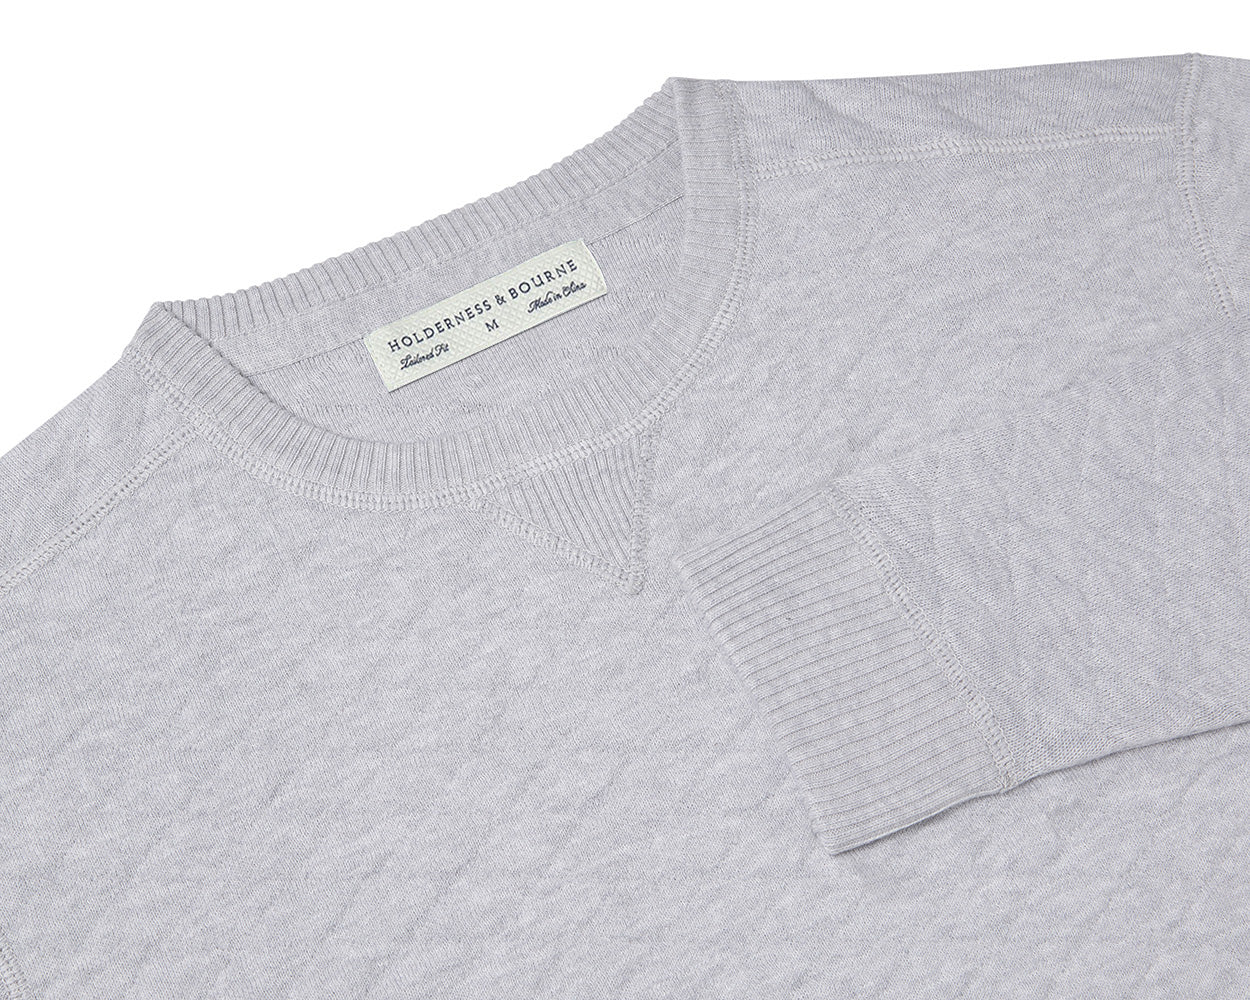 Folded Holderness and Bourne gray sweater.